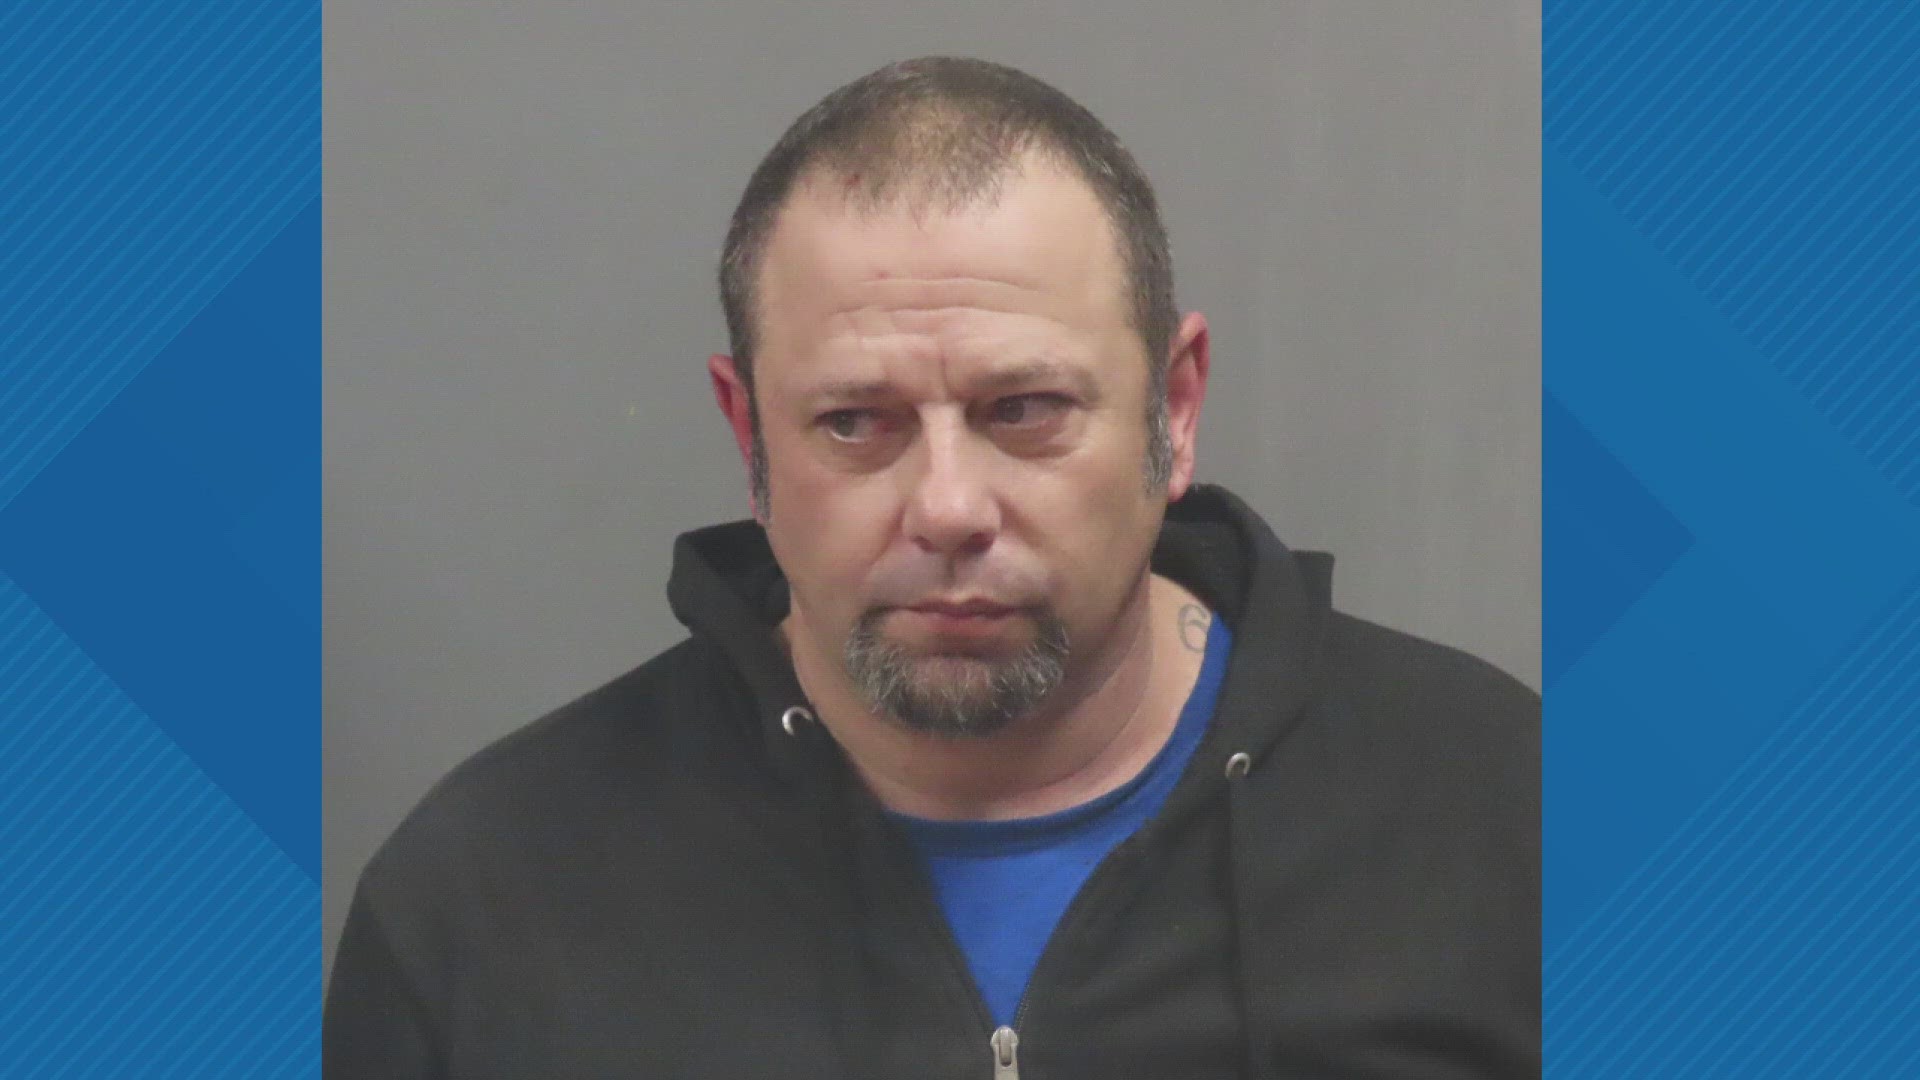 The Jefferson County Sheriff's Department said a man sexually abused a girl multiple times over seven years. Police believe there are more victims.